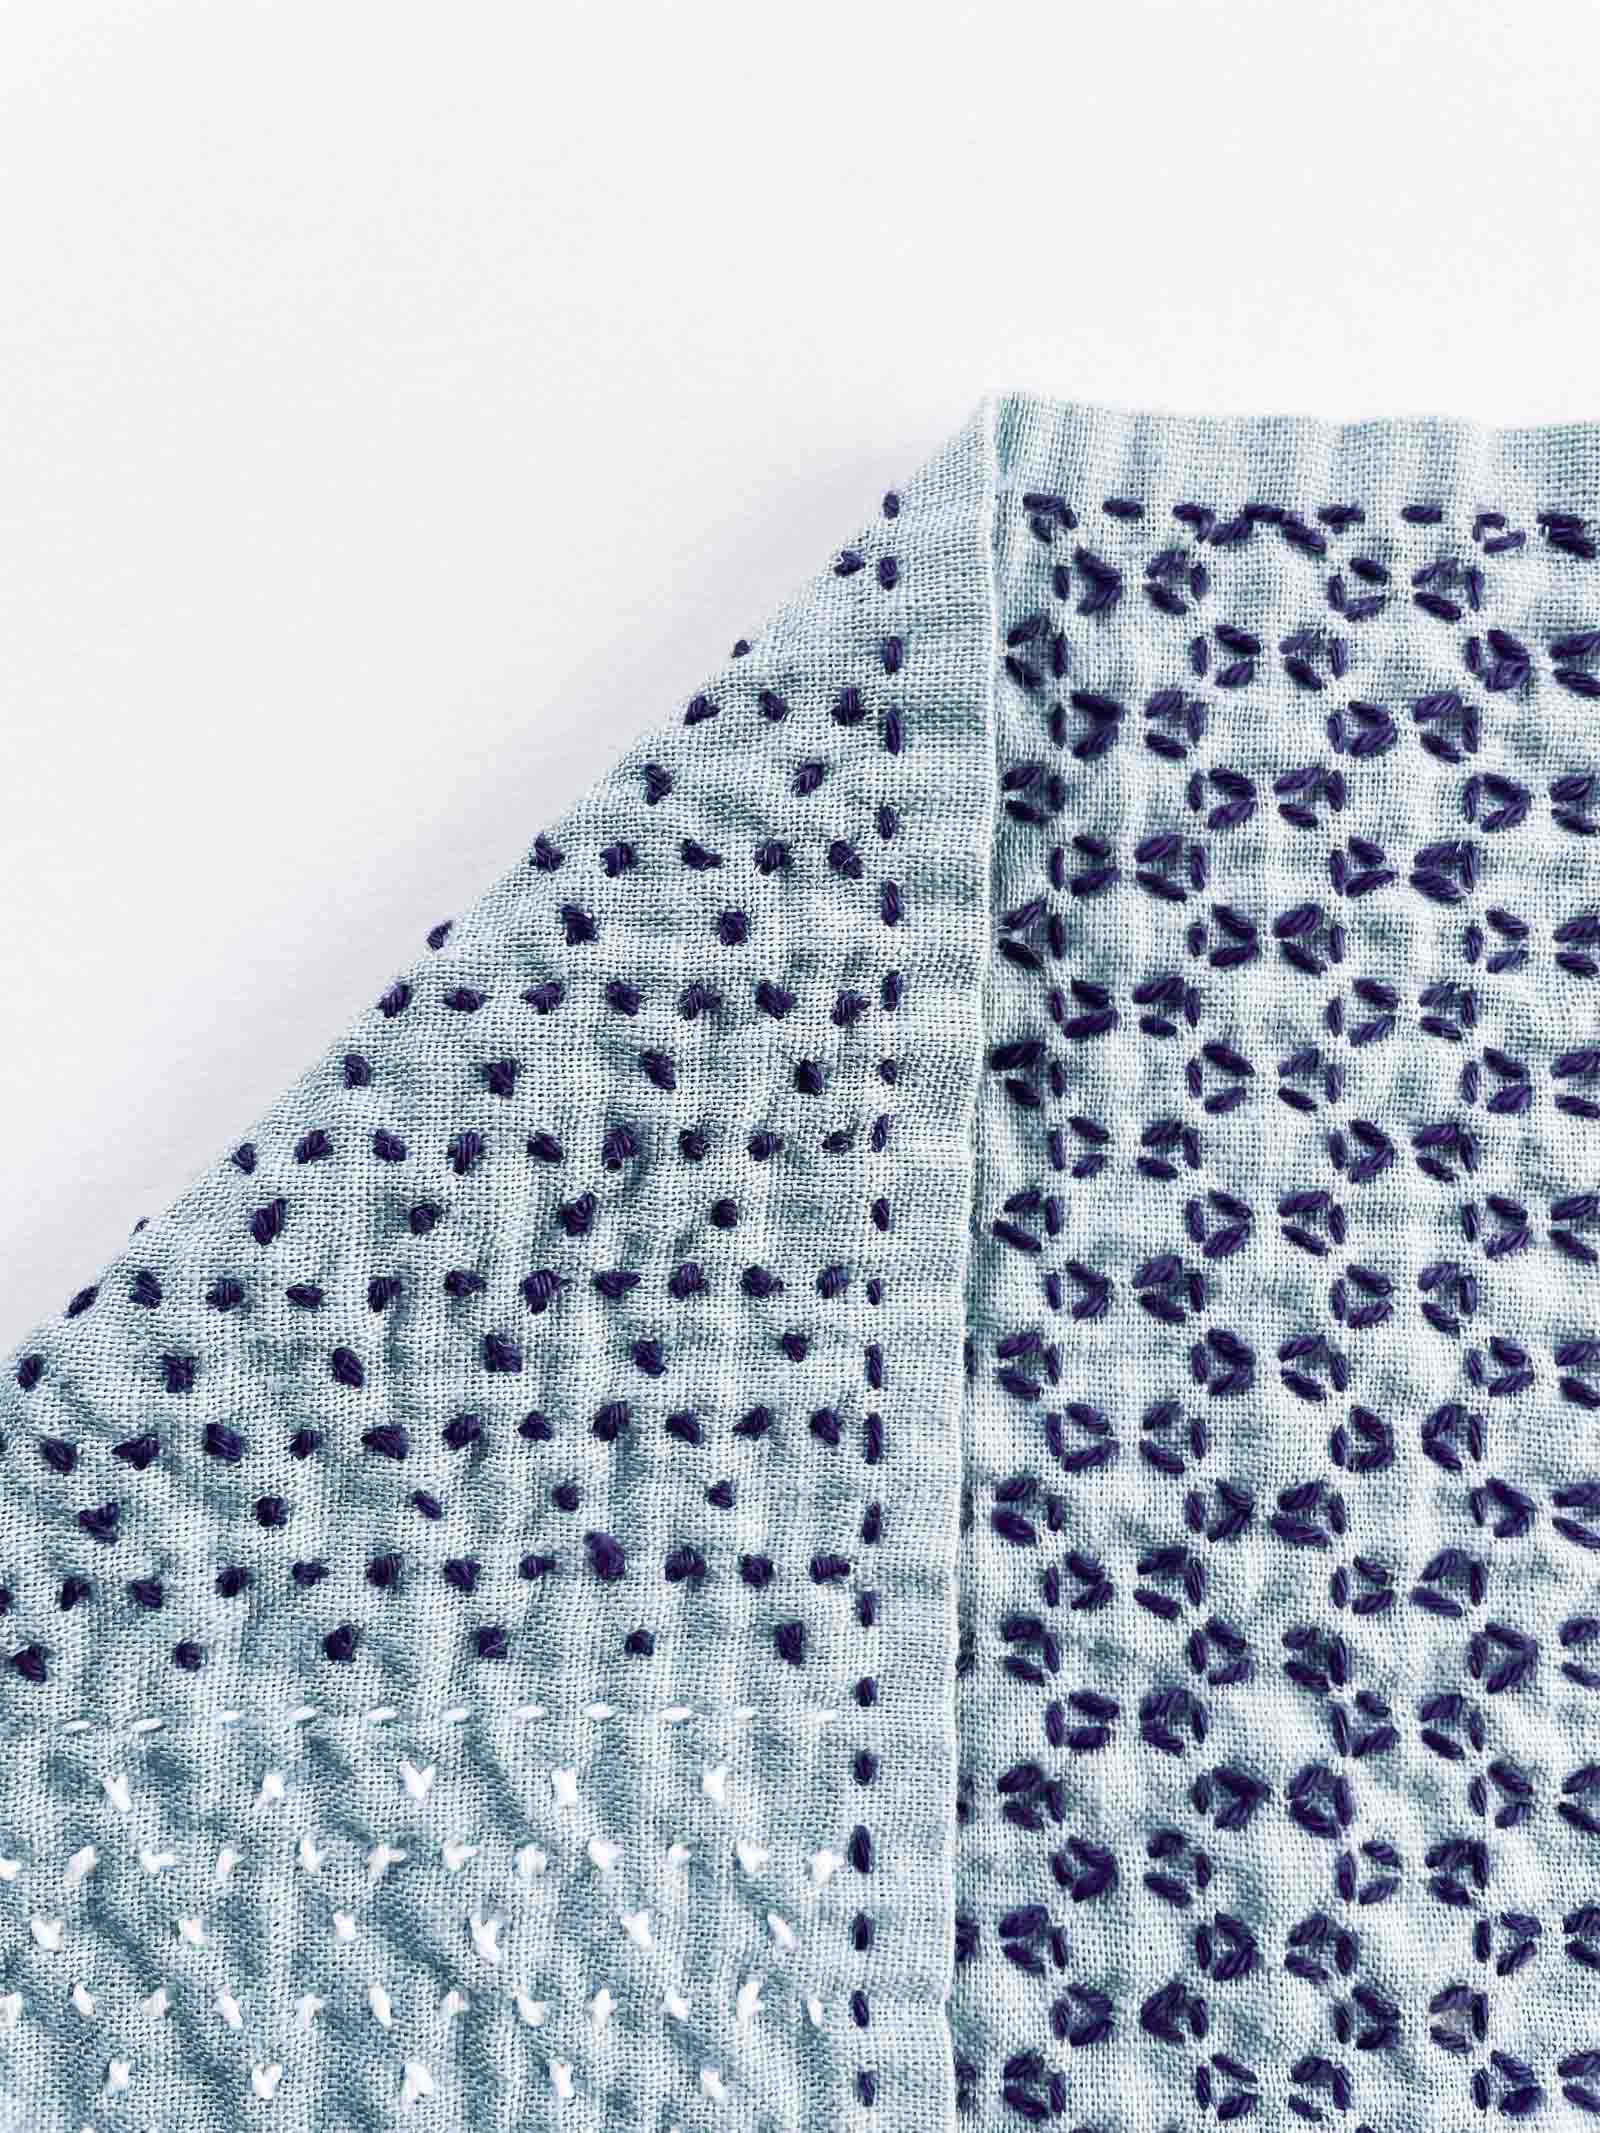 Front and back of a blue sashiko cloth with white and purple stitches.